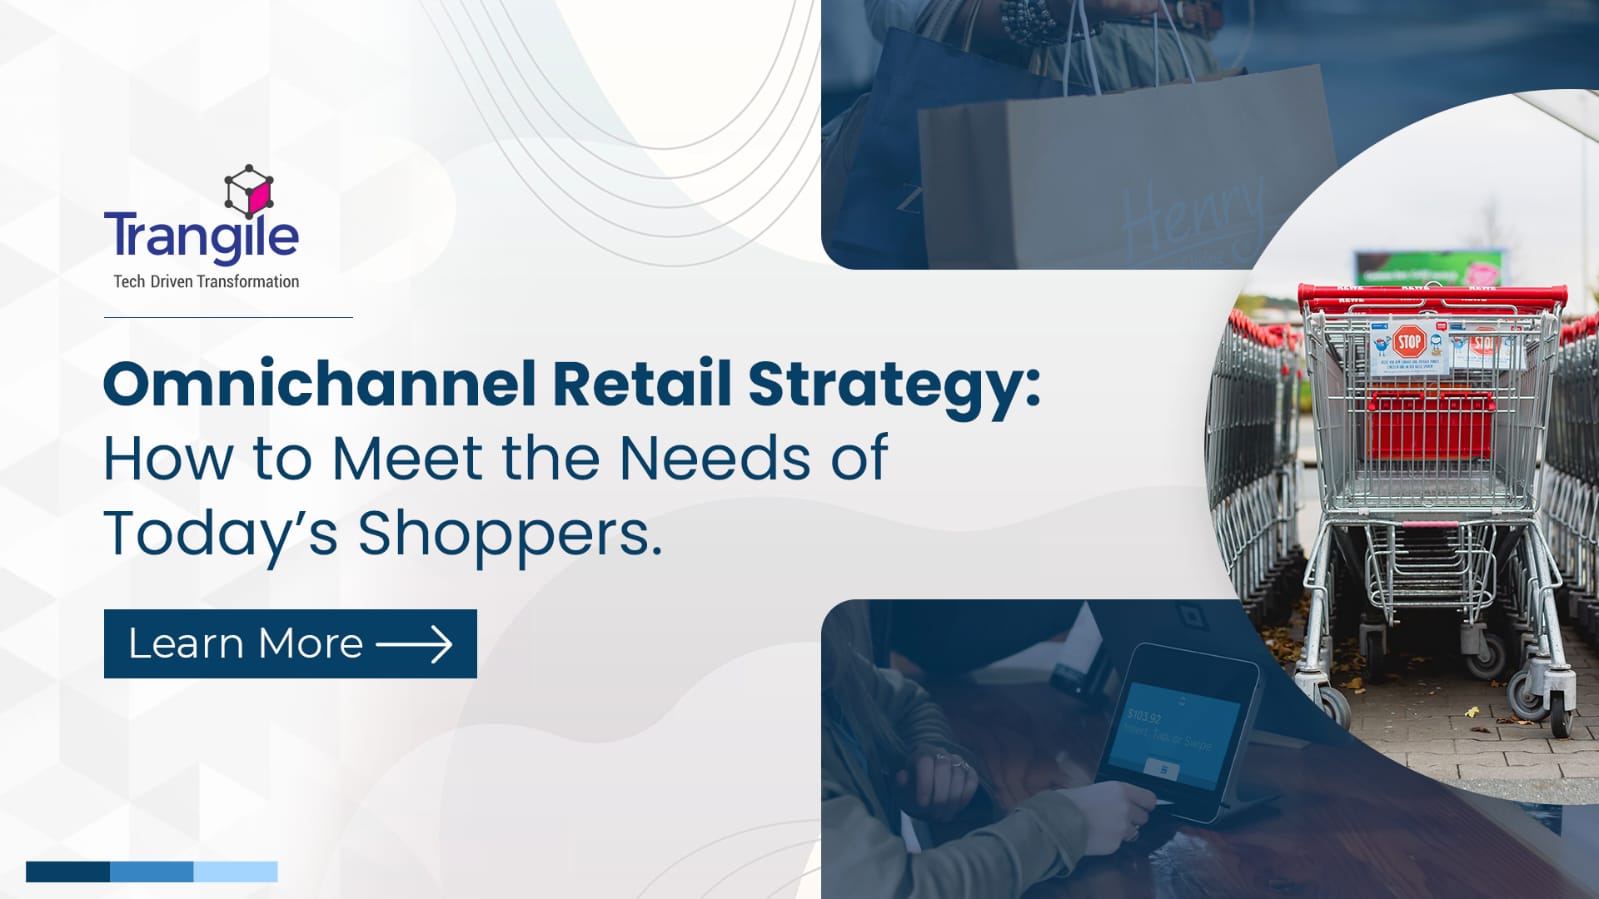 Omnichannel Retail Strategy: How to Meet the Needs of Today’s Shoppers?